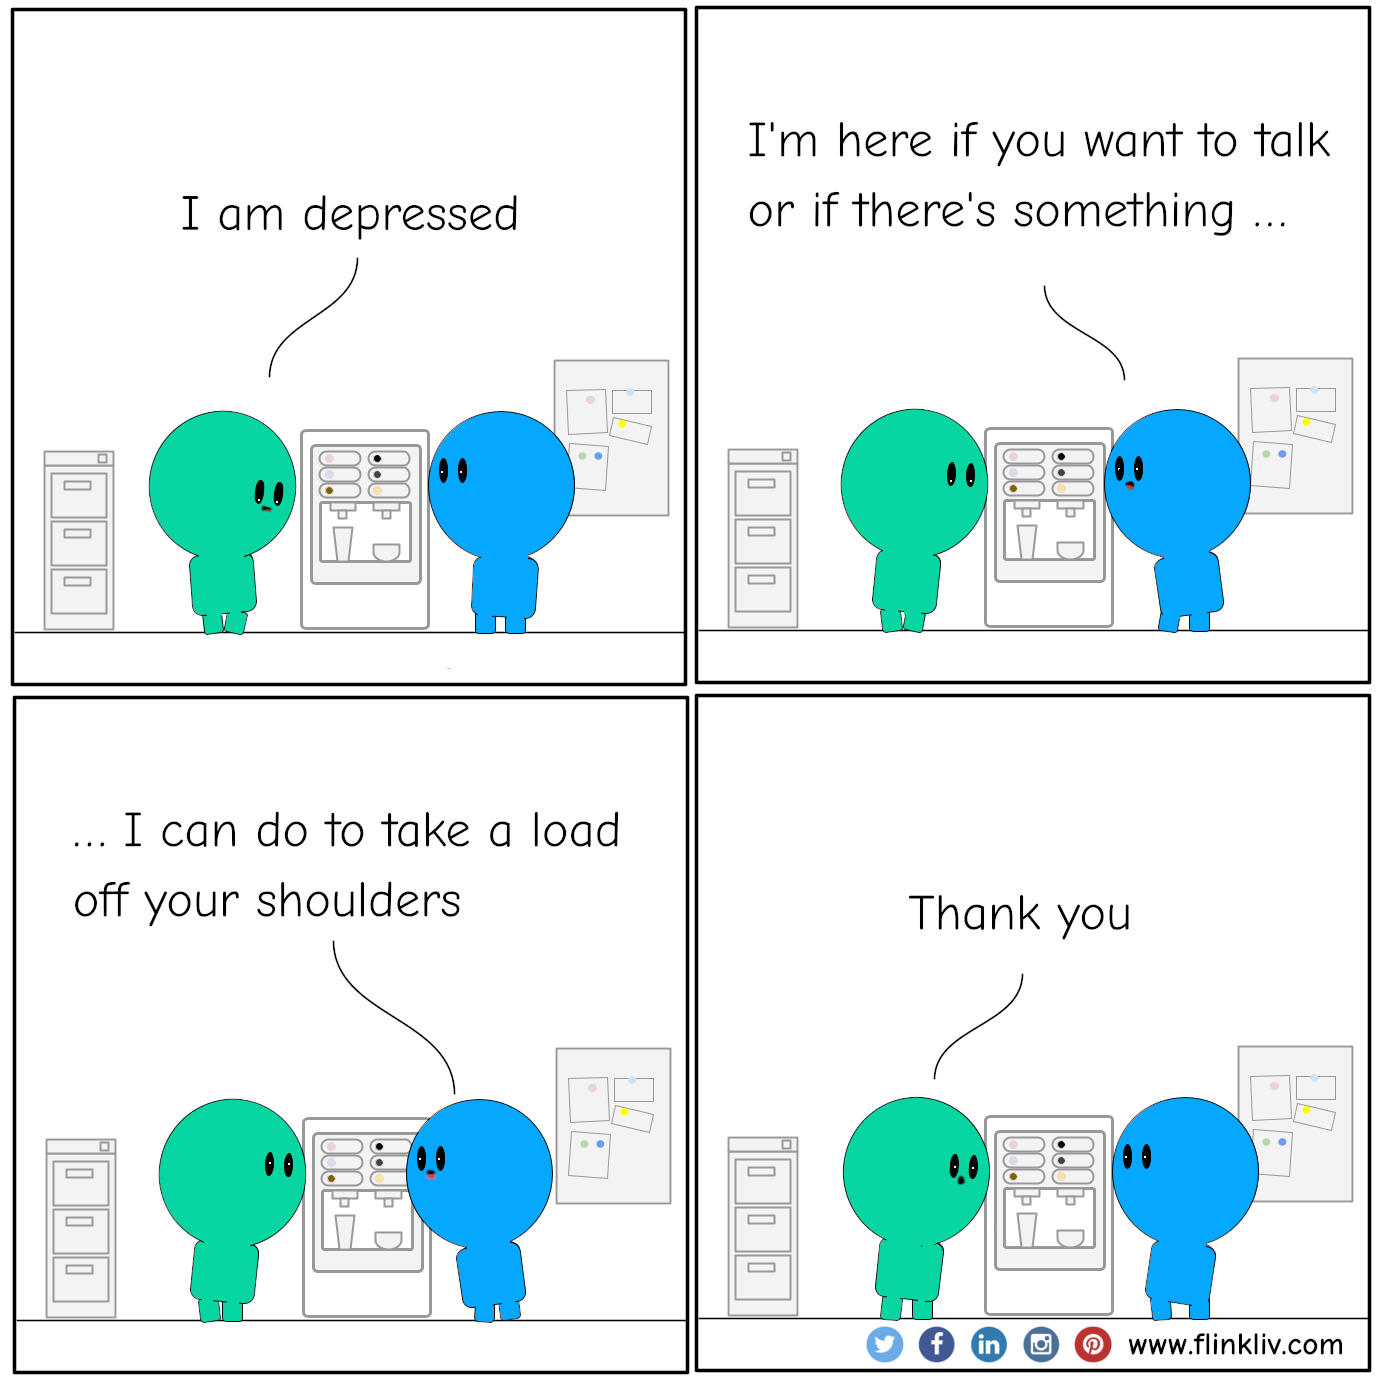 Conversation between A and B about how to offer compassion to people with depression. A: I am depressed. B: I'm sorry to hear that. I'm here if you want to talk or if there's something I can do to take a load off your shoulders. A: Thank you By flinkliv.com